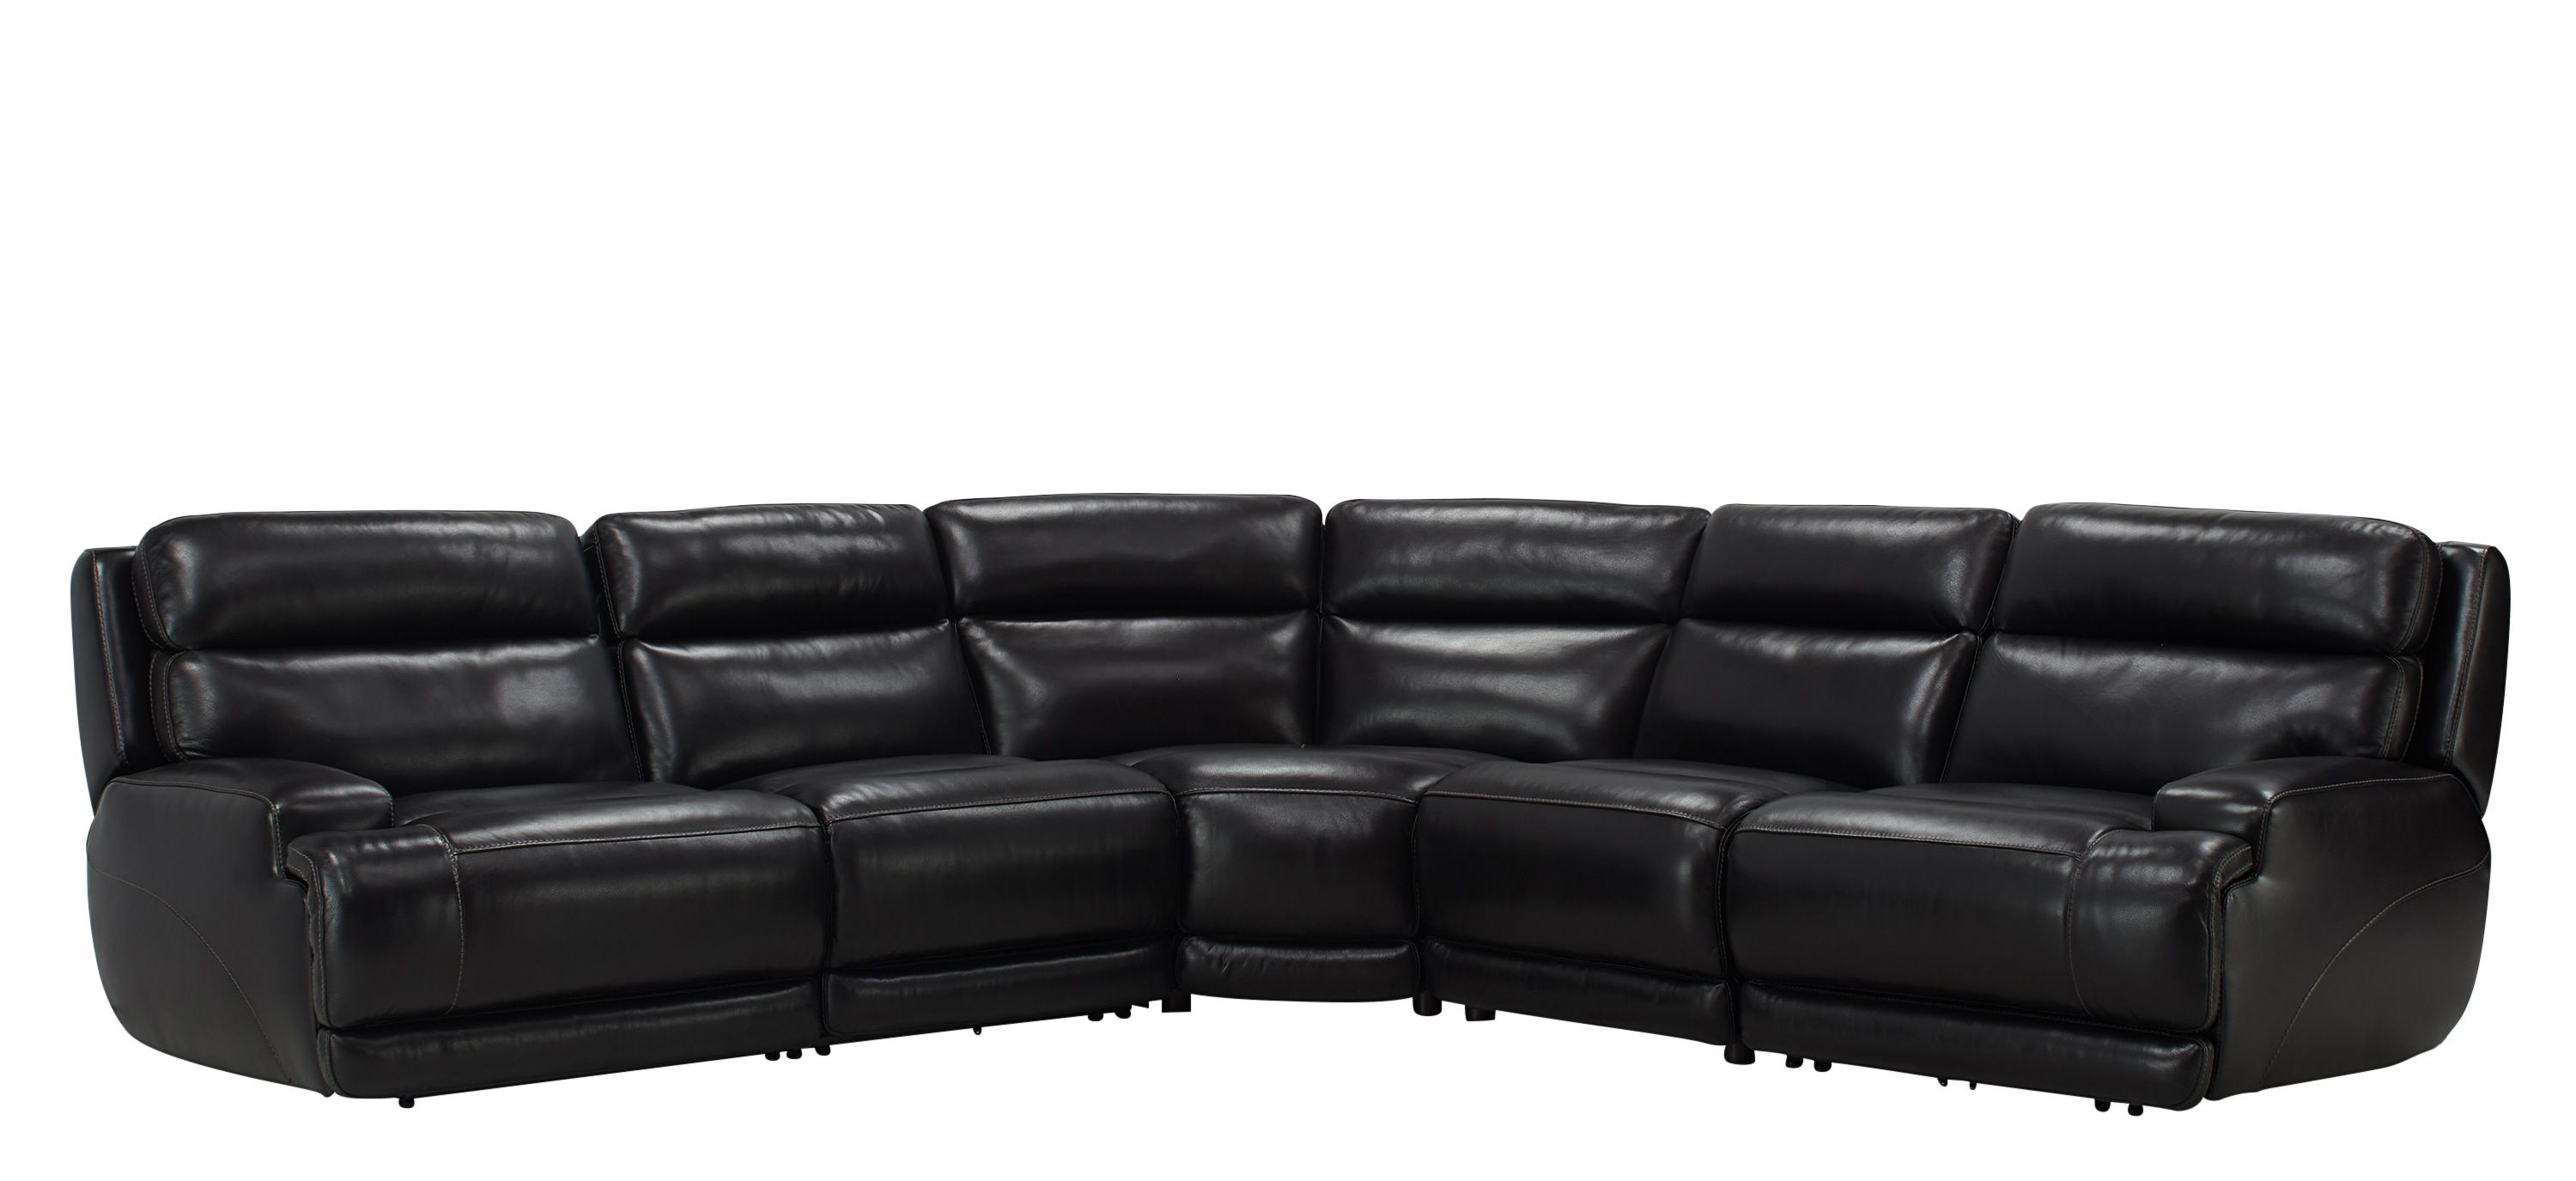 Tompkins Leather 5-pc. Sectional